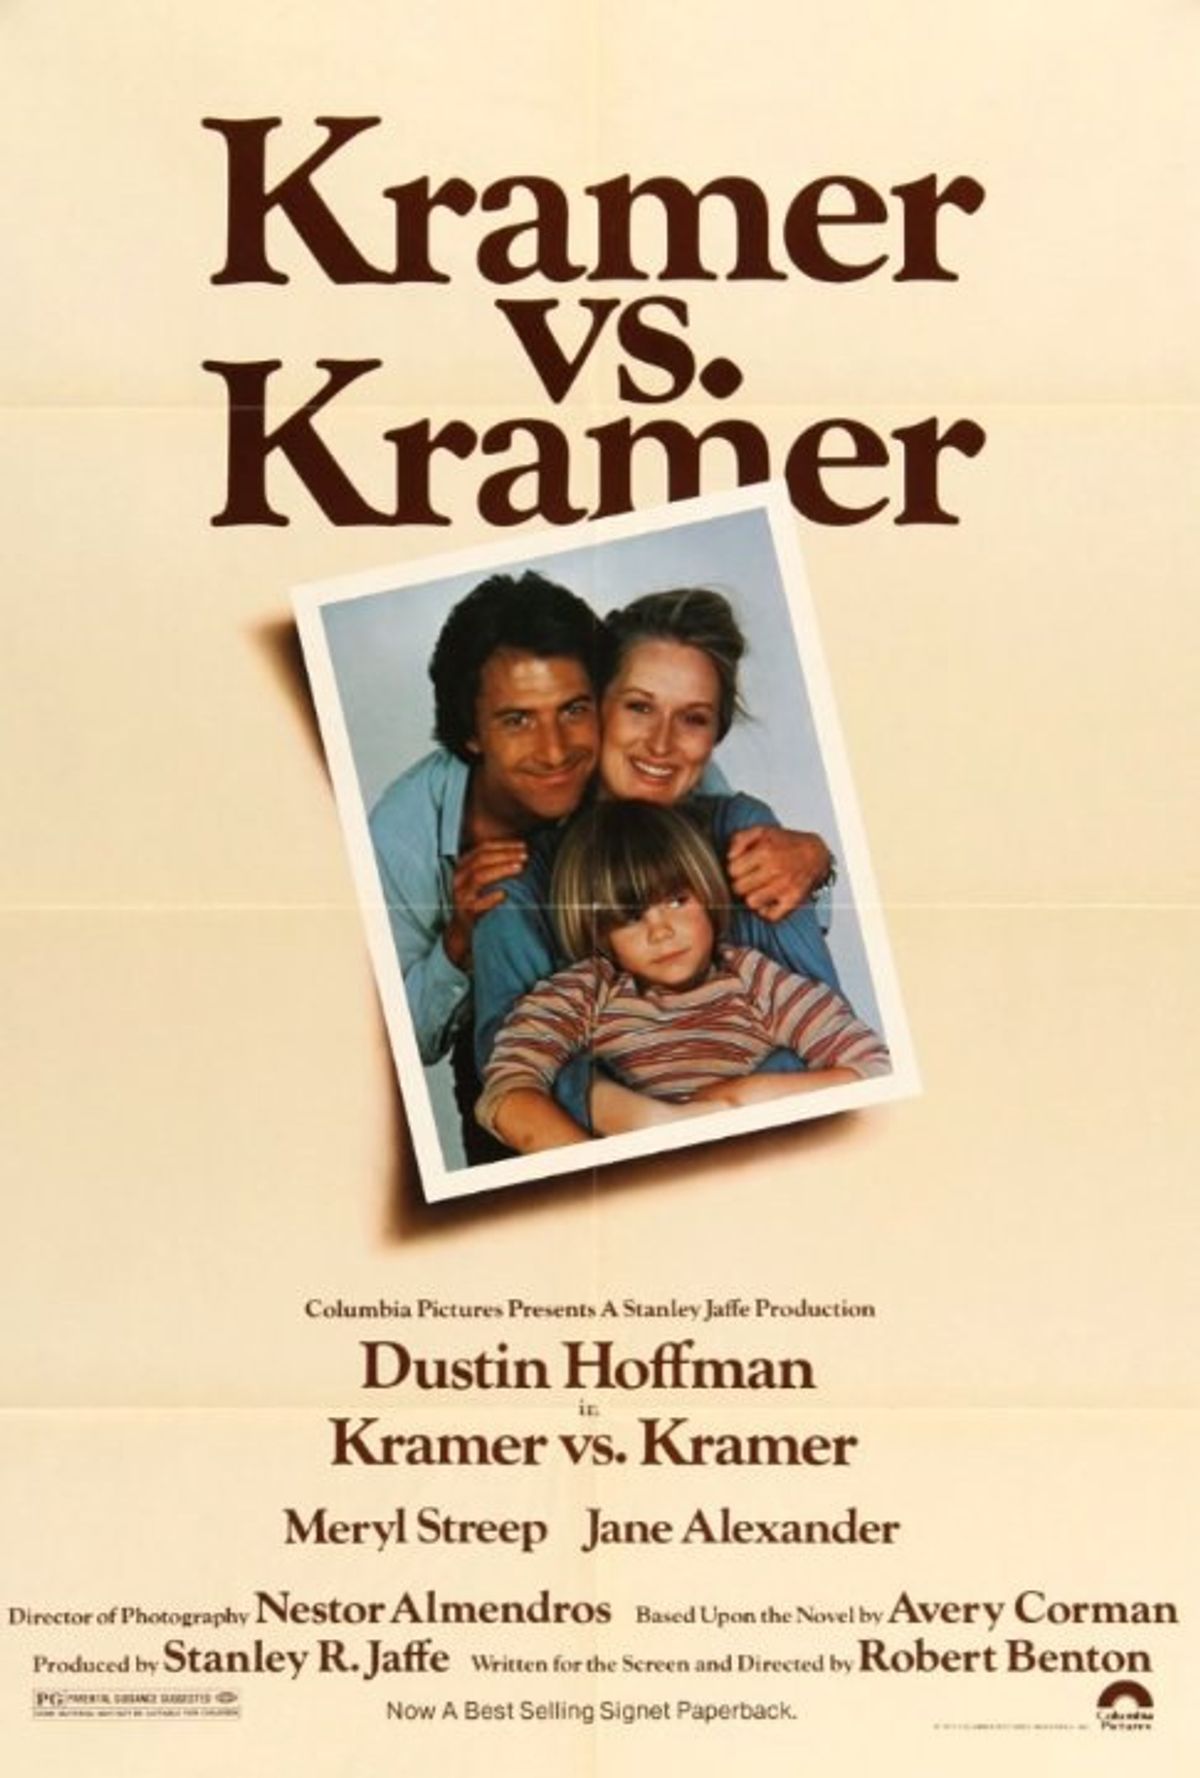 Hollywood Shows Itself At Its Best And Worst In 'Kramer vs Kramer'